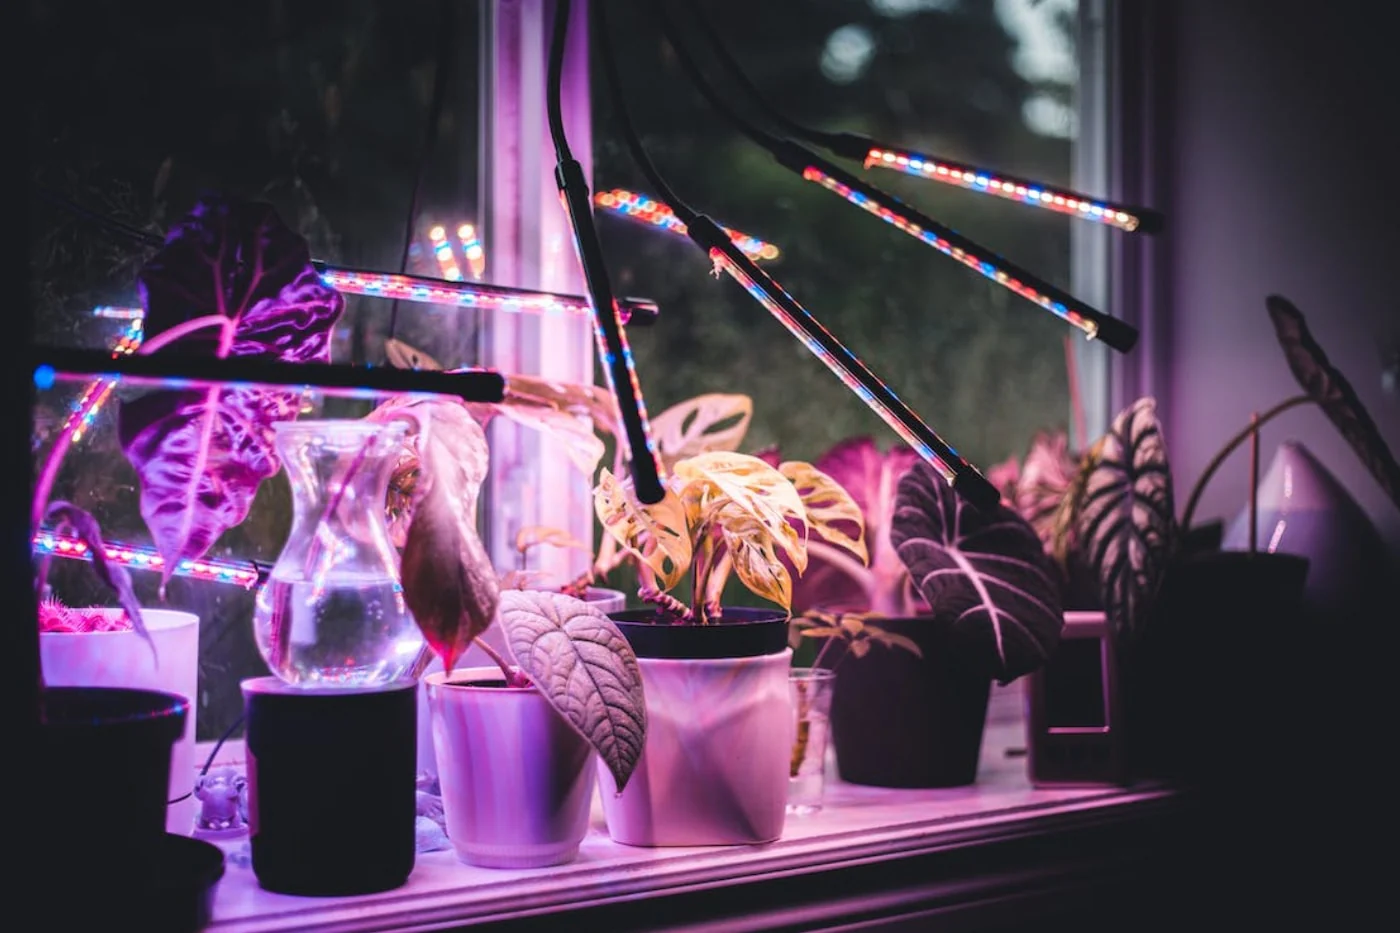 What color of grow light is the best?